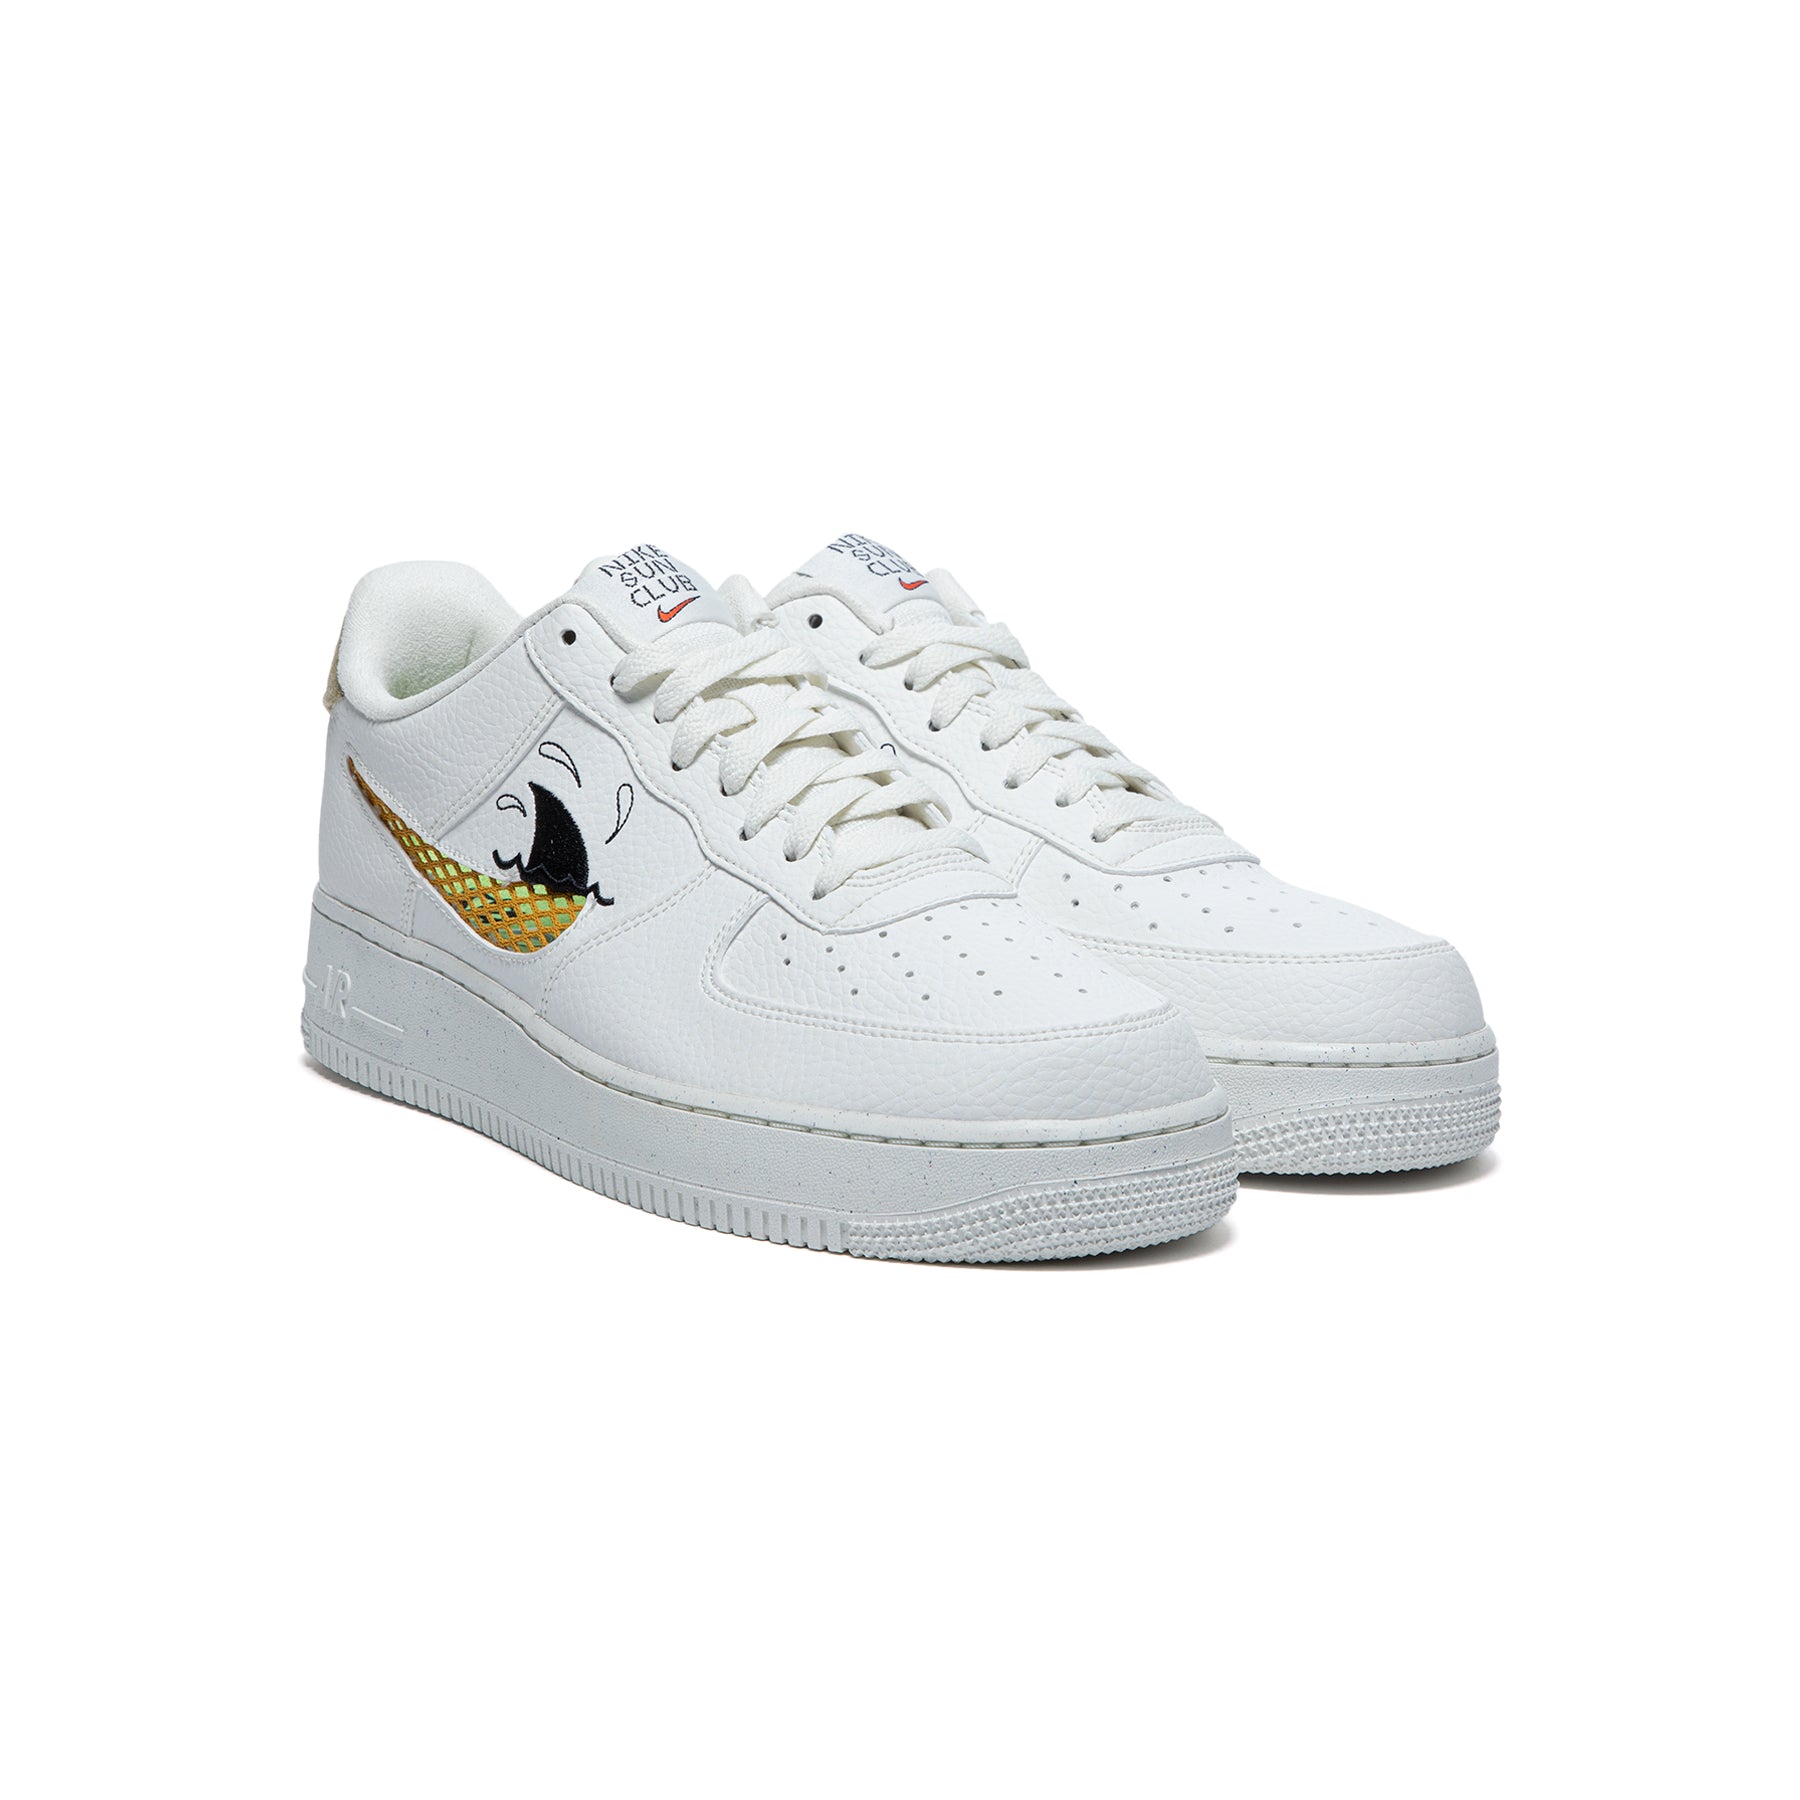 Nike Air Force 1 '07 LV8 NN sneakers in sail/sanded gold